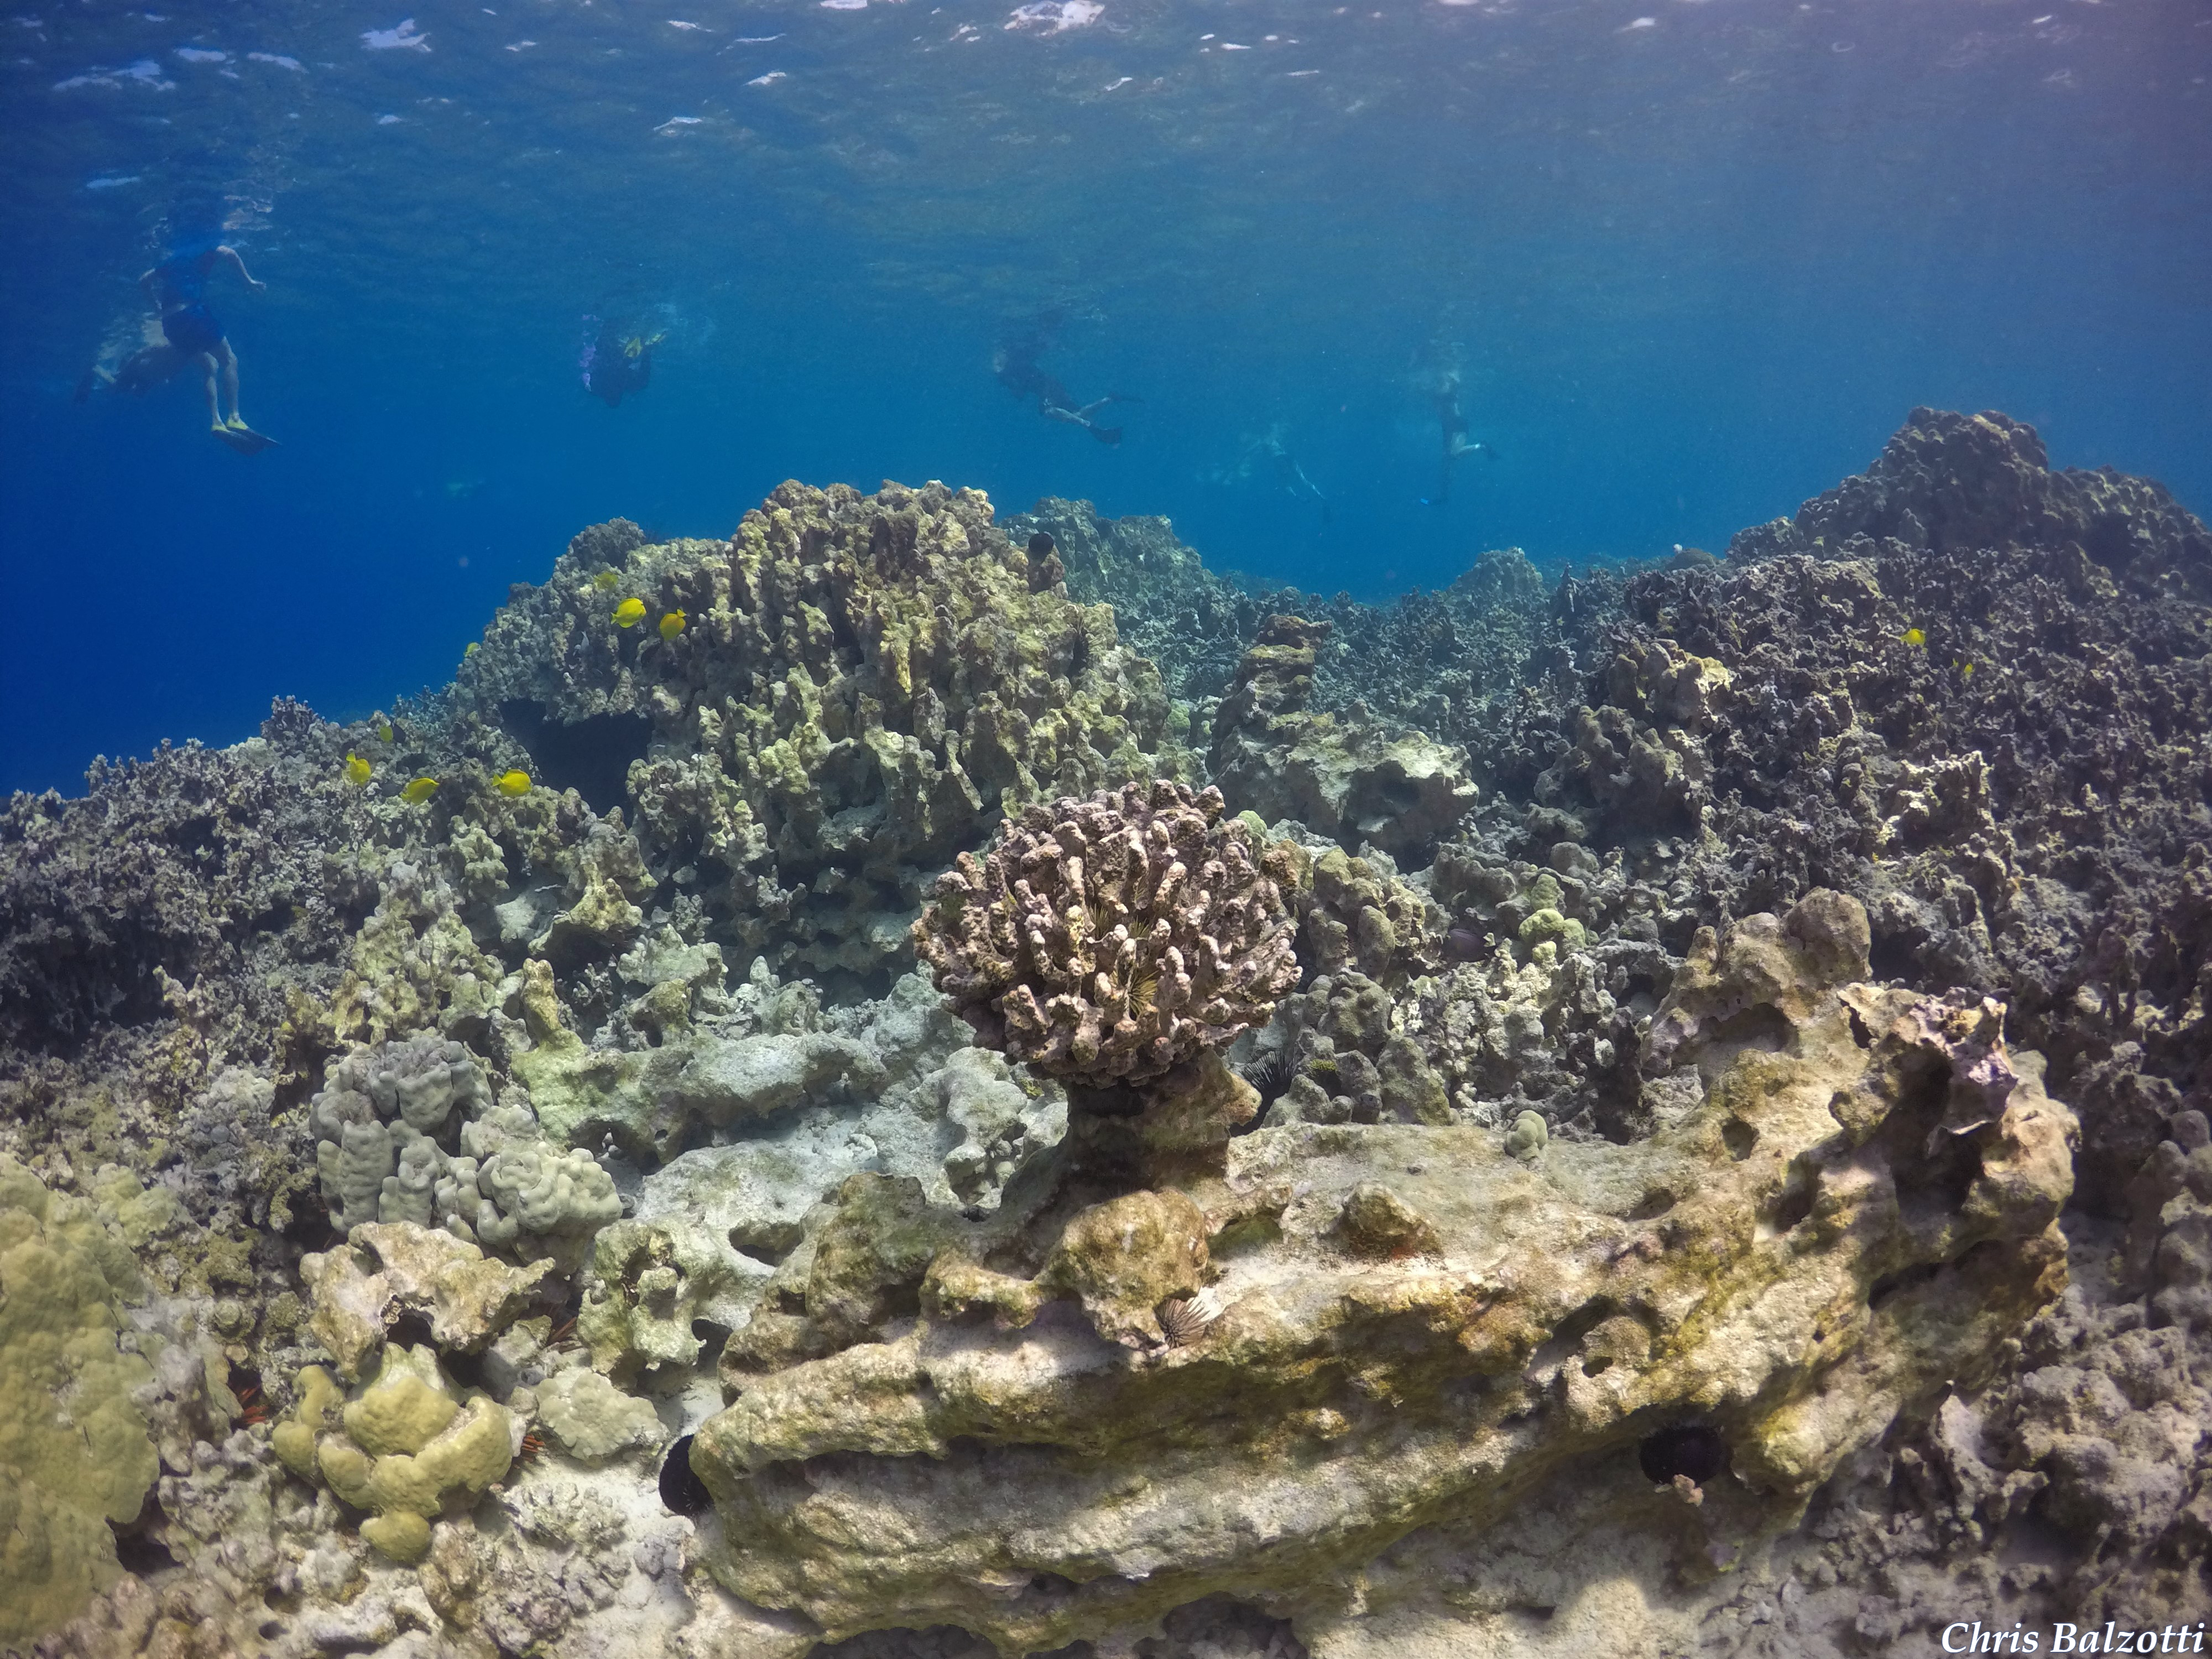 ASU center announces Hawaii coral reef conservation program in partnership with Lenfest Ocean Program